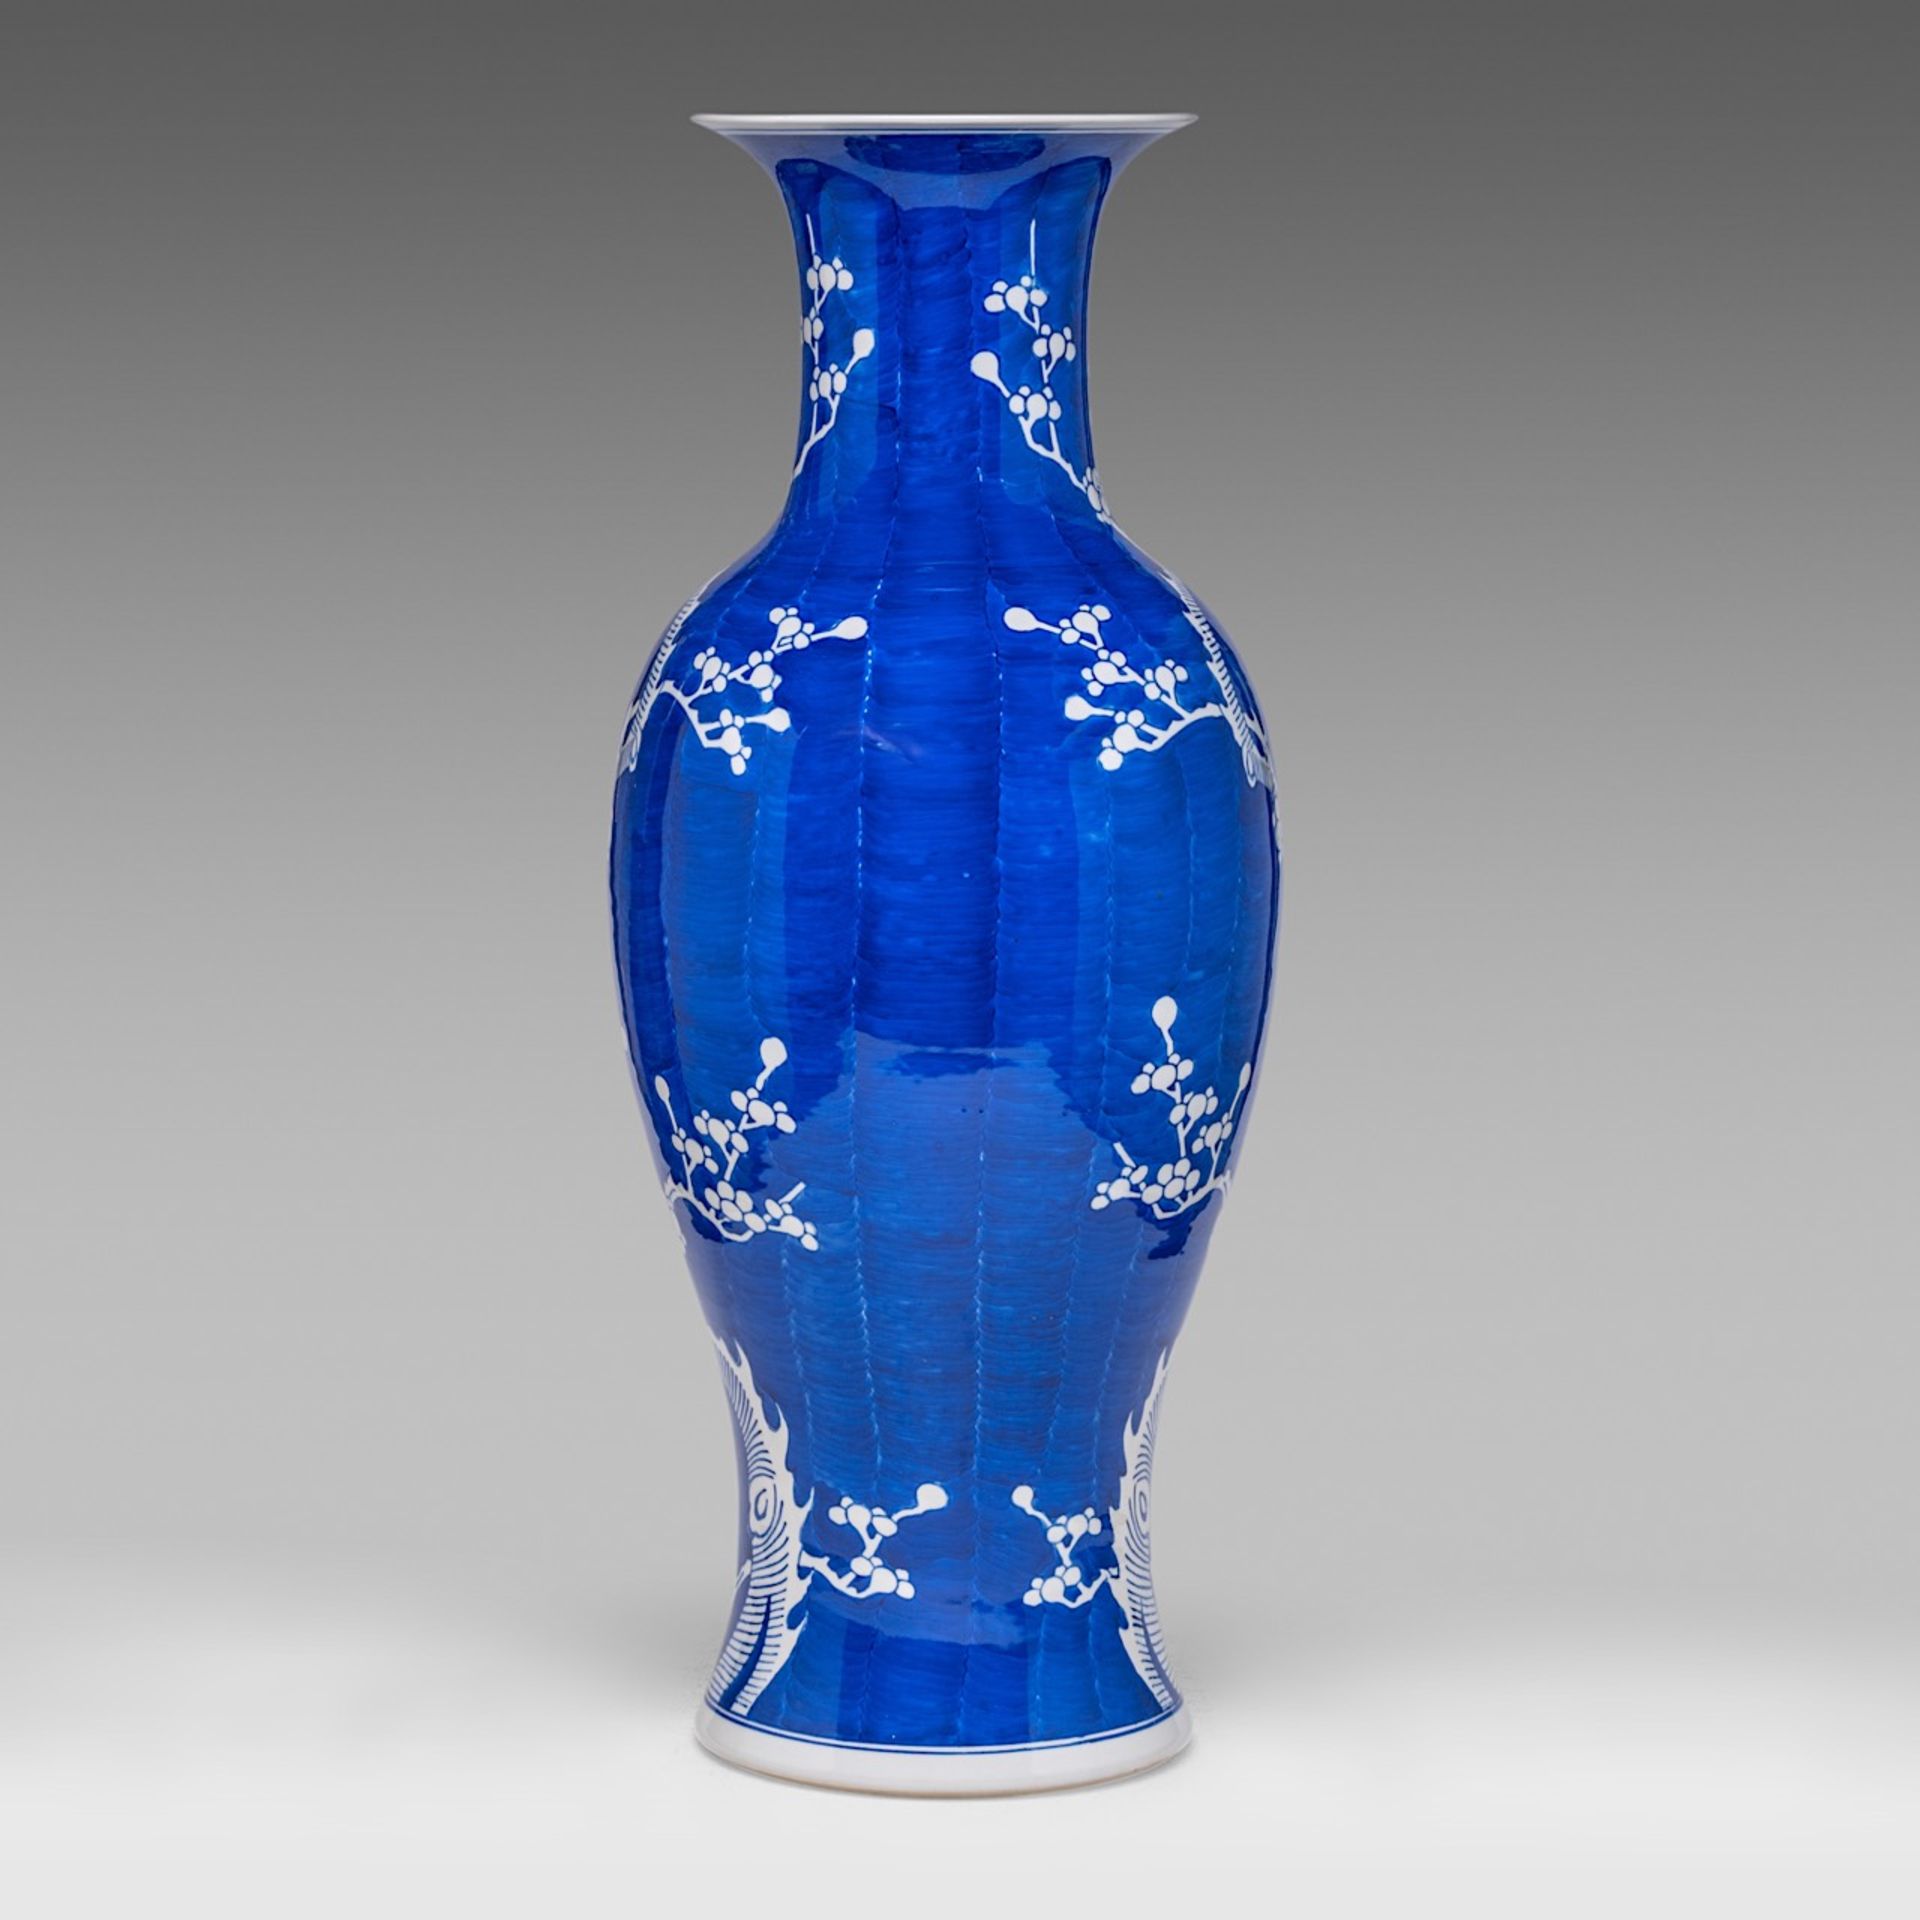 A Chinese blue and white 'Prunus on cracked ice' baluster vase, 20thC, H 63,5 cm - Image 4 of 6